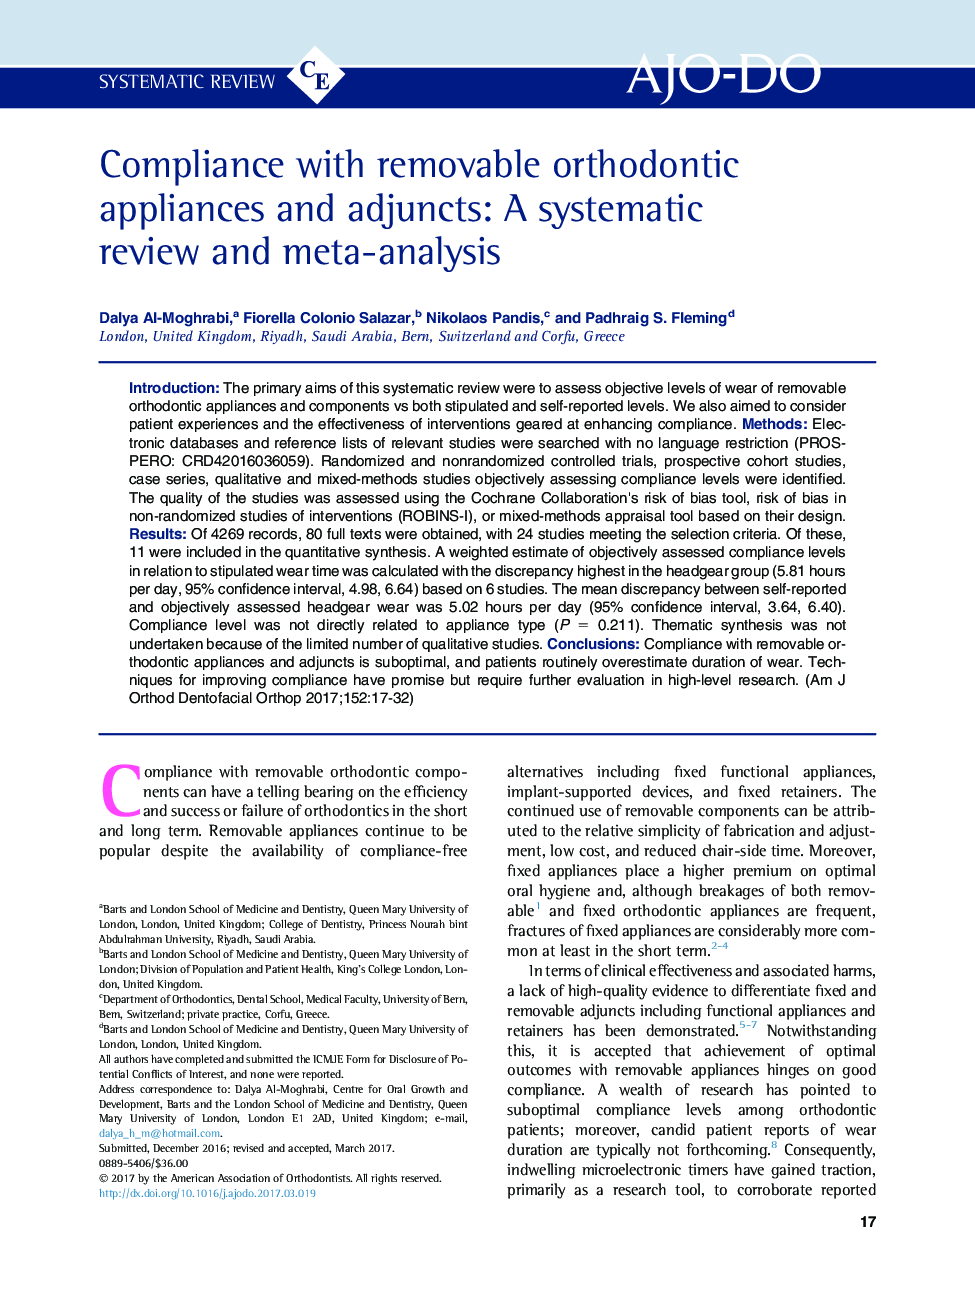 Compliance with removable orthodontic appliances and adjuncts: A systematic review and meta-analysis